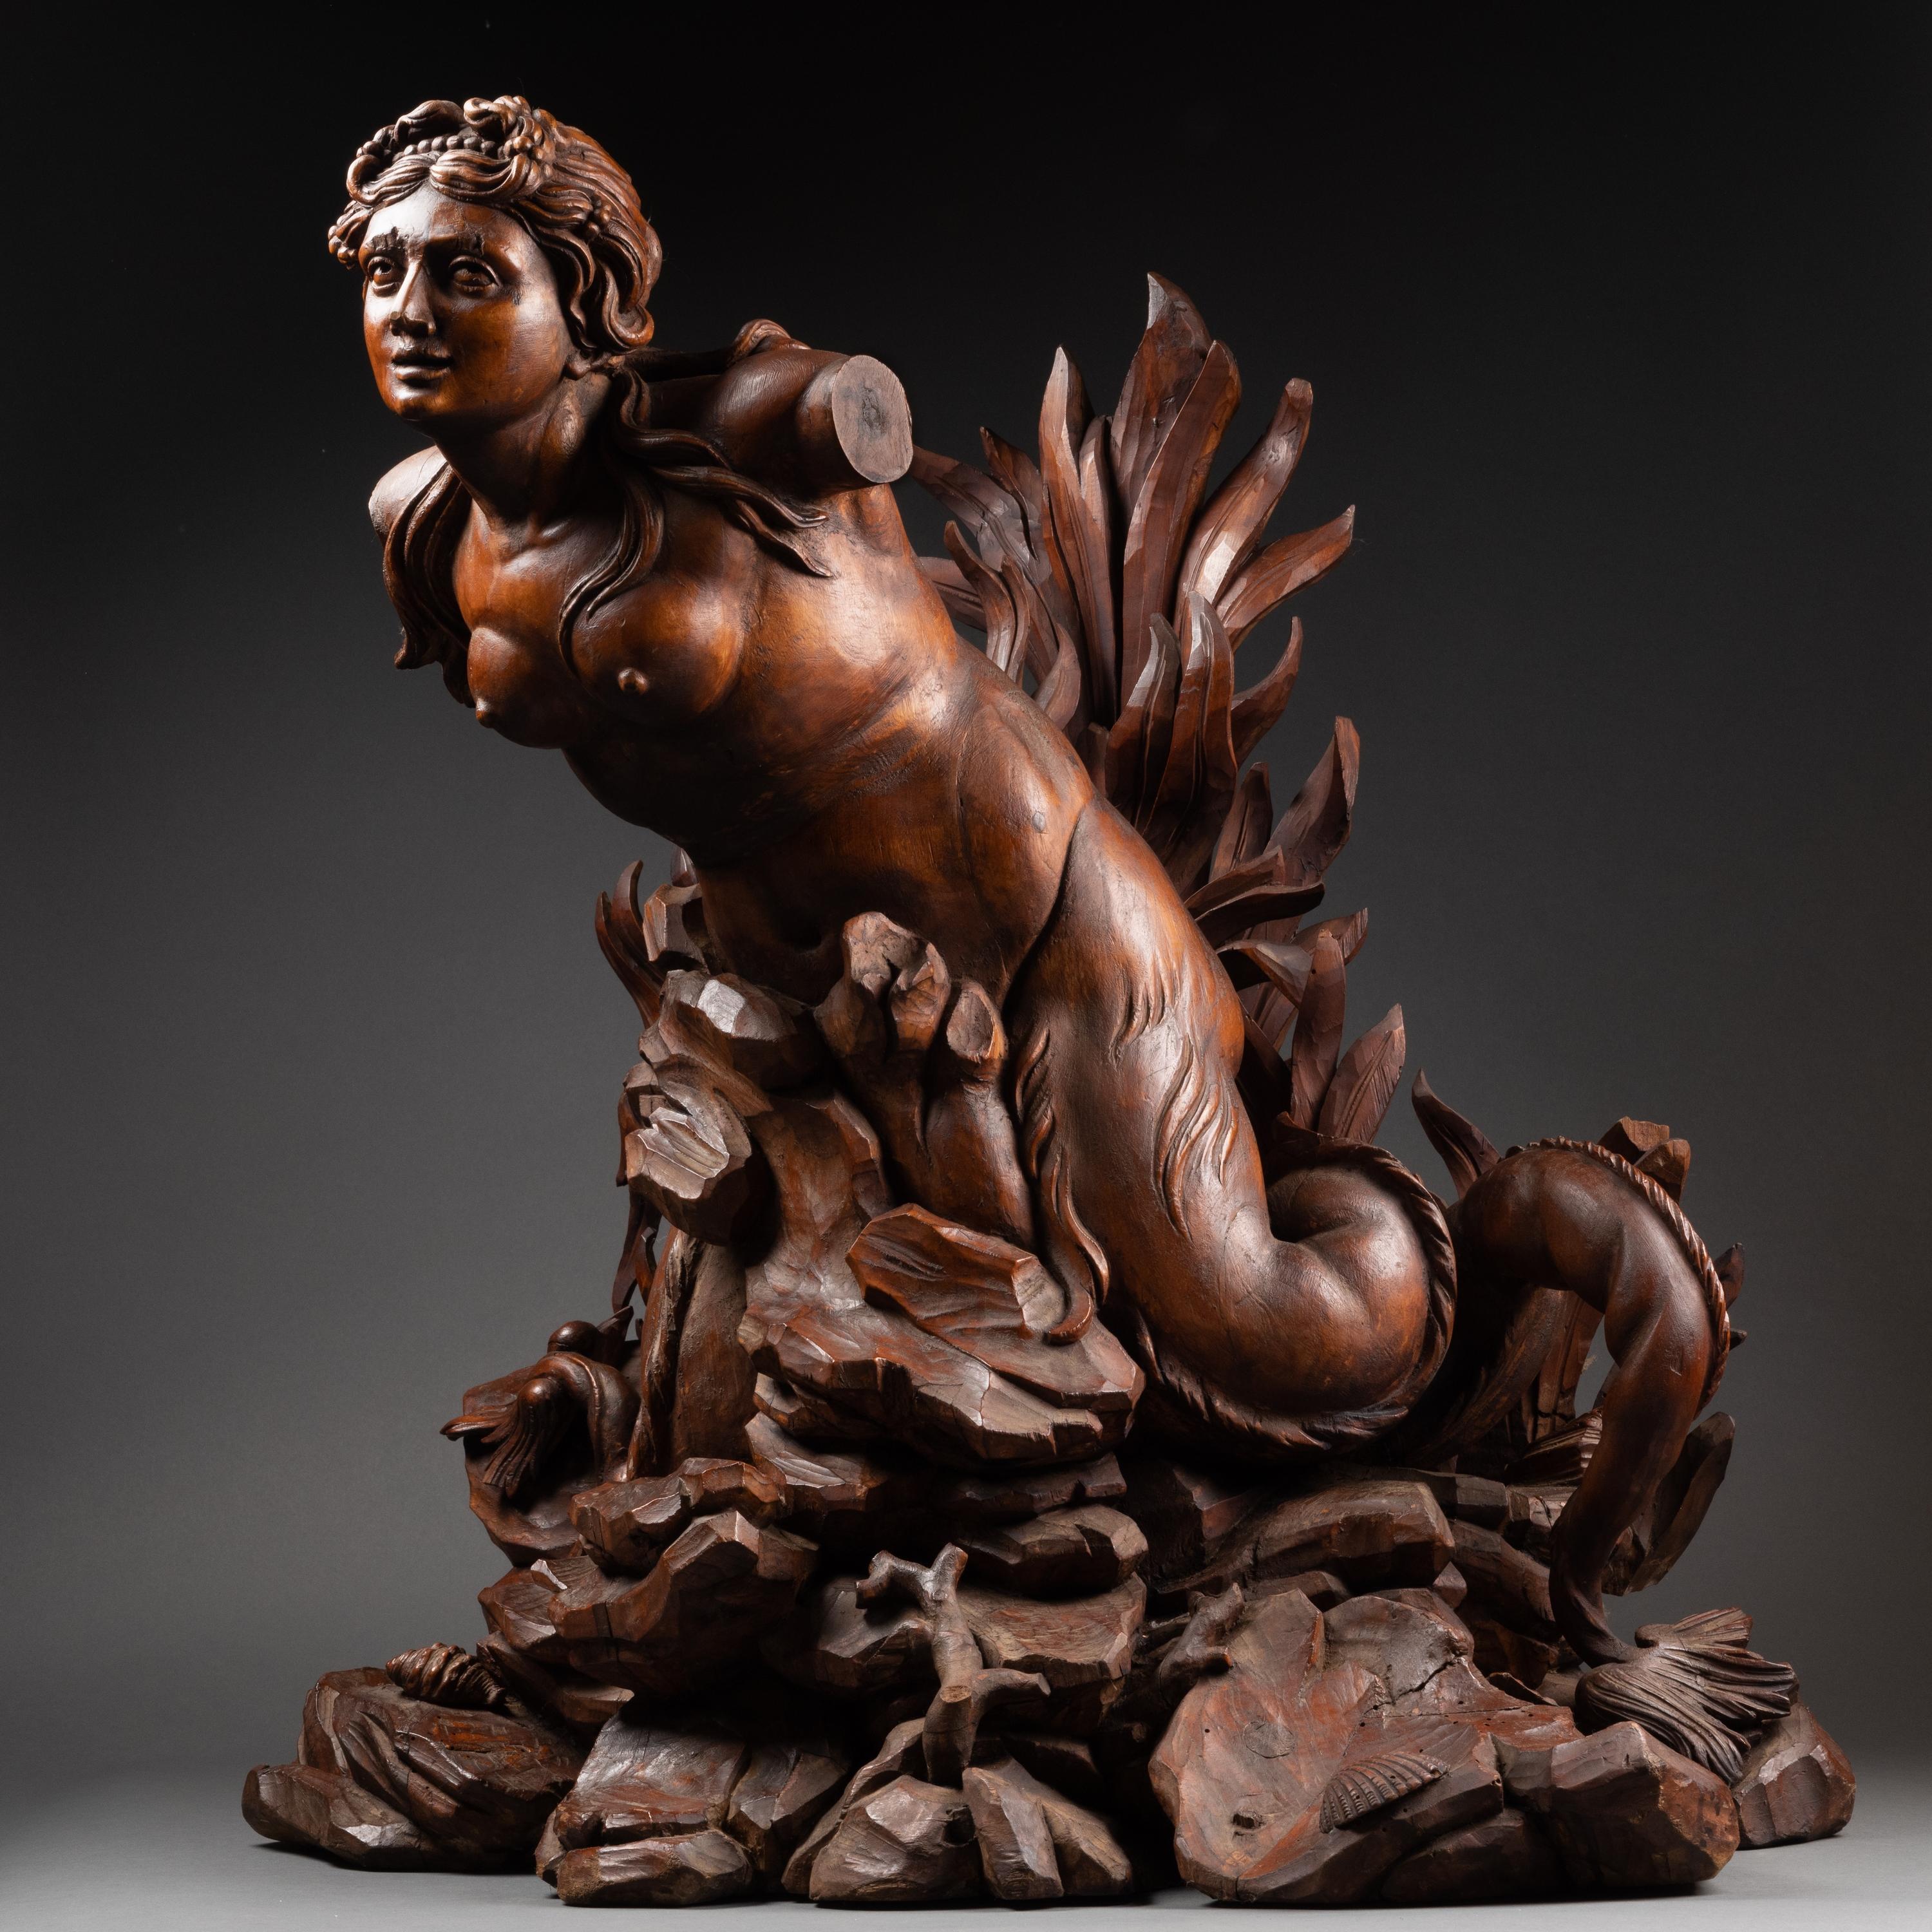 A late 17th c. Italian carved figure of Mermaid, 
Circle of Filippo Parodi  (Genoa, 1630 – July 22, 1702) 
Dimensions: h. 29.13 in, w. 30.31 in, p. 18.9 in (at the base)

Magnificent Italian Baroque sculpture depicting a mermaid seated on the